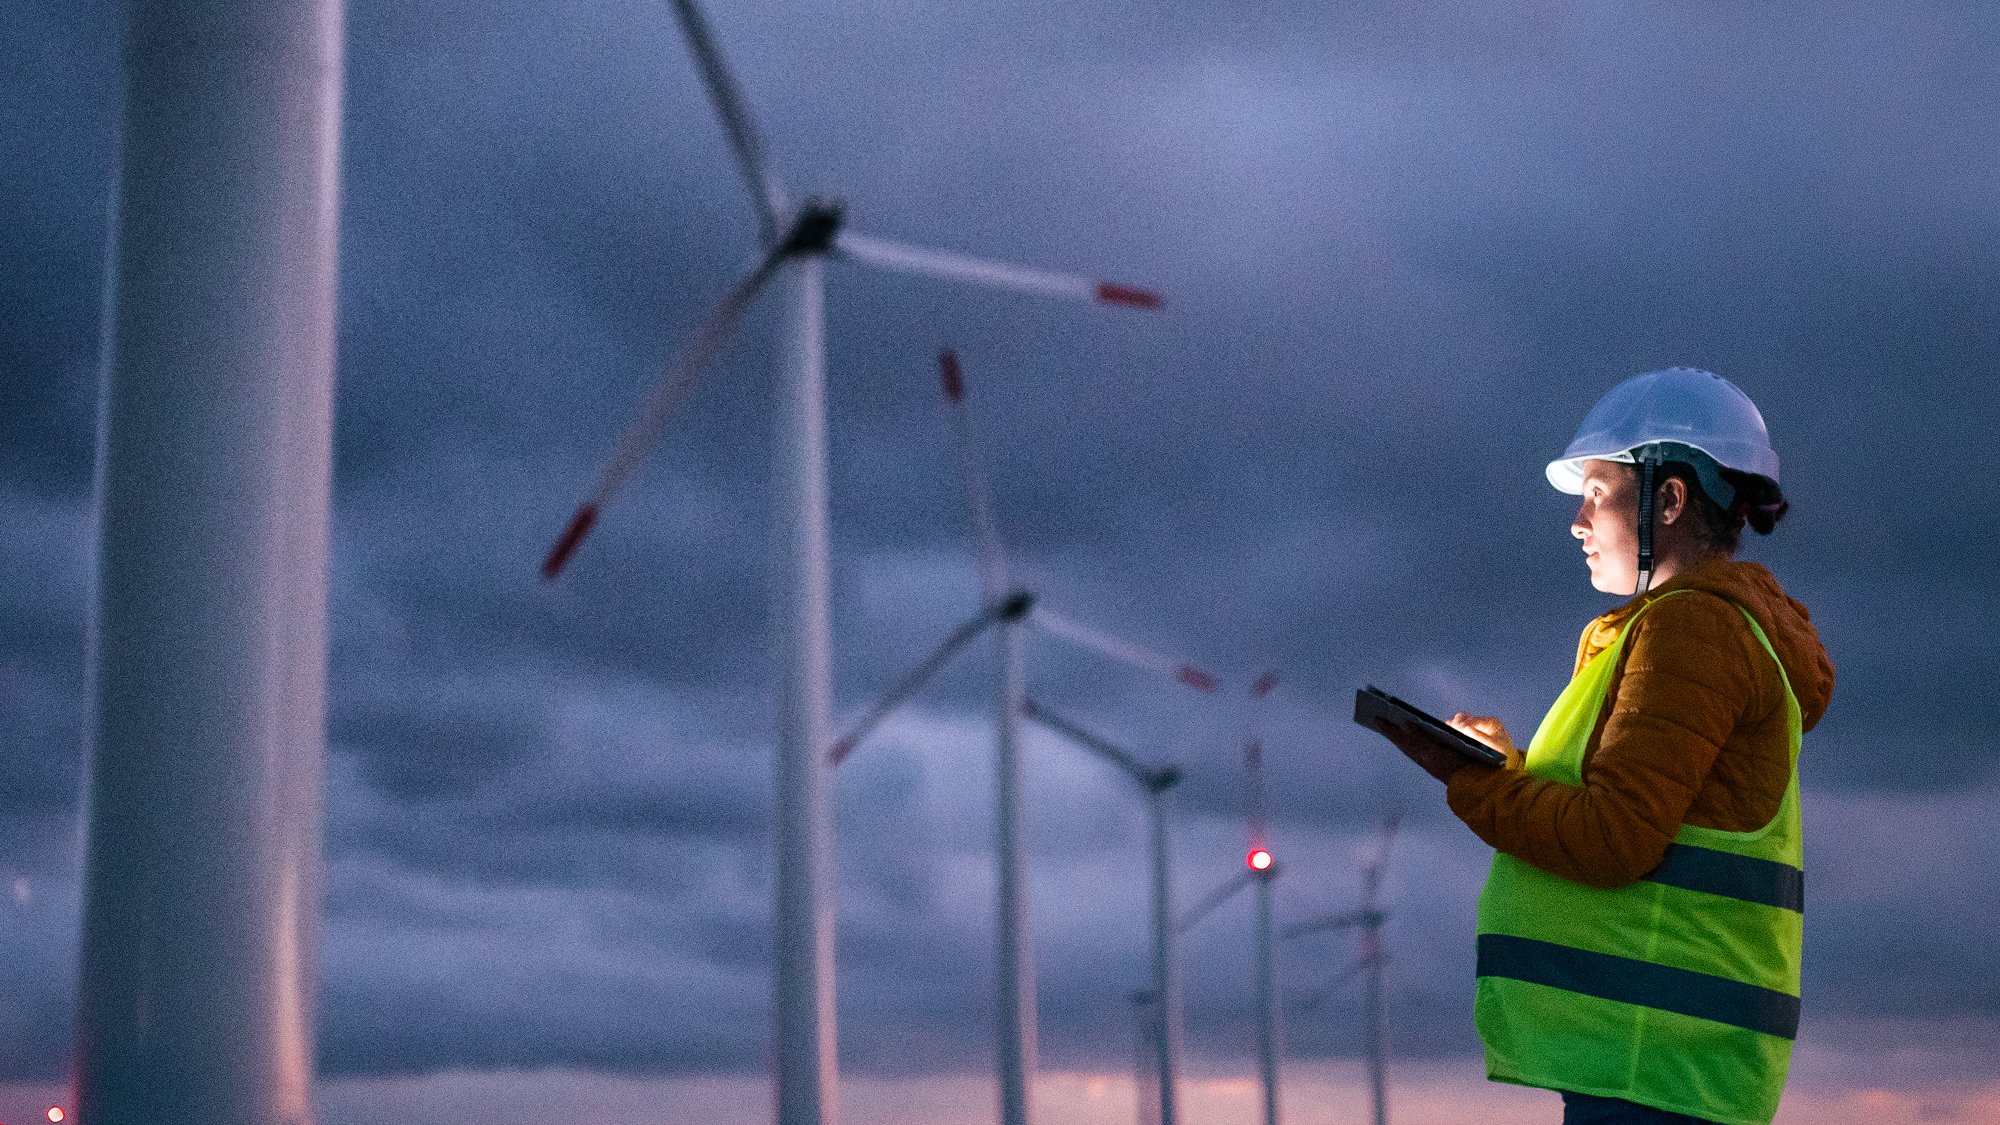 A femaile engineer holding a tablet looks over at a group of wind turbines and monitors them, at dusk.